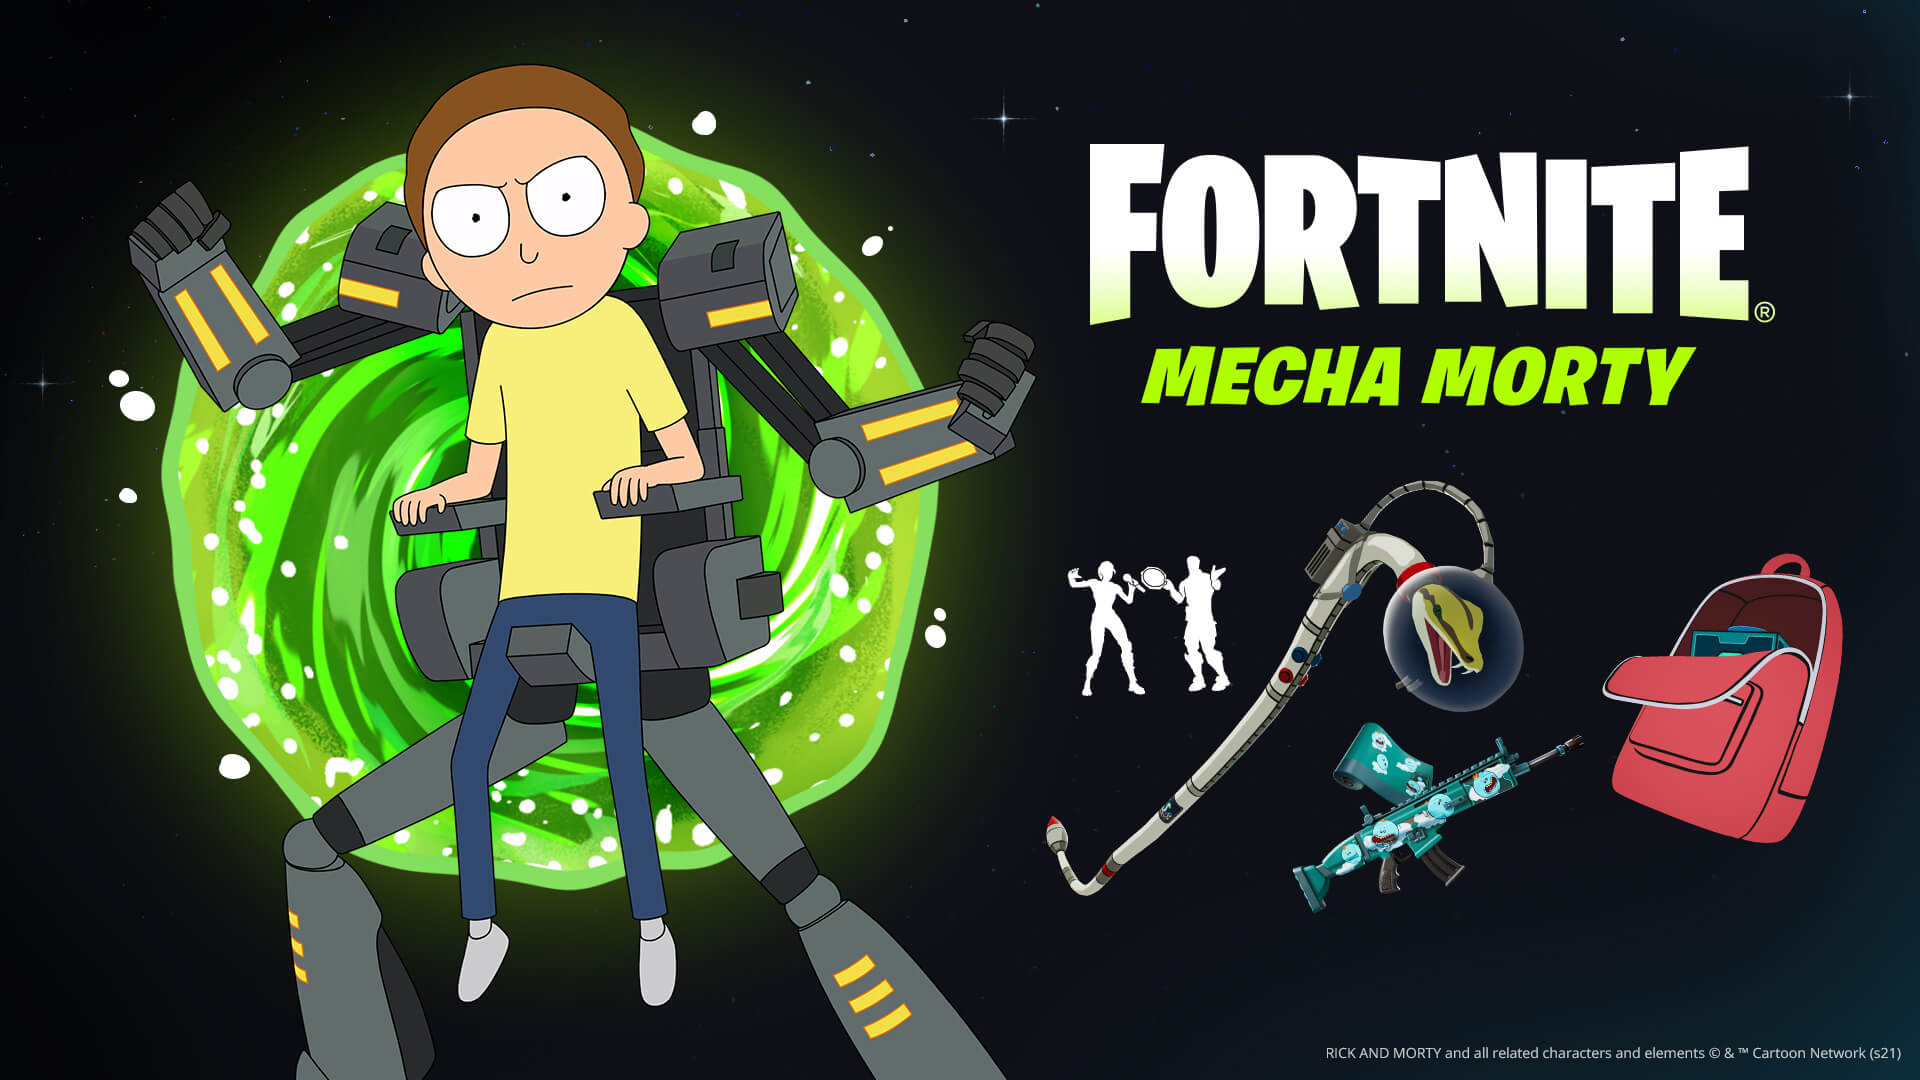 Morty has Joined Rick Sanchez in Fortnite with new 'Mecha Morty' Outfit